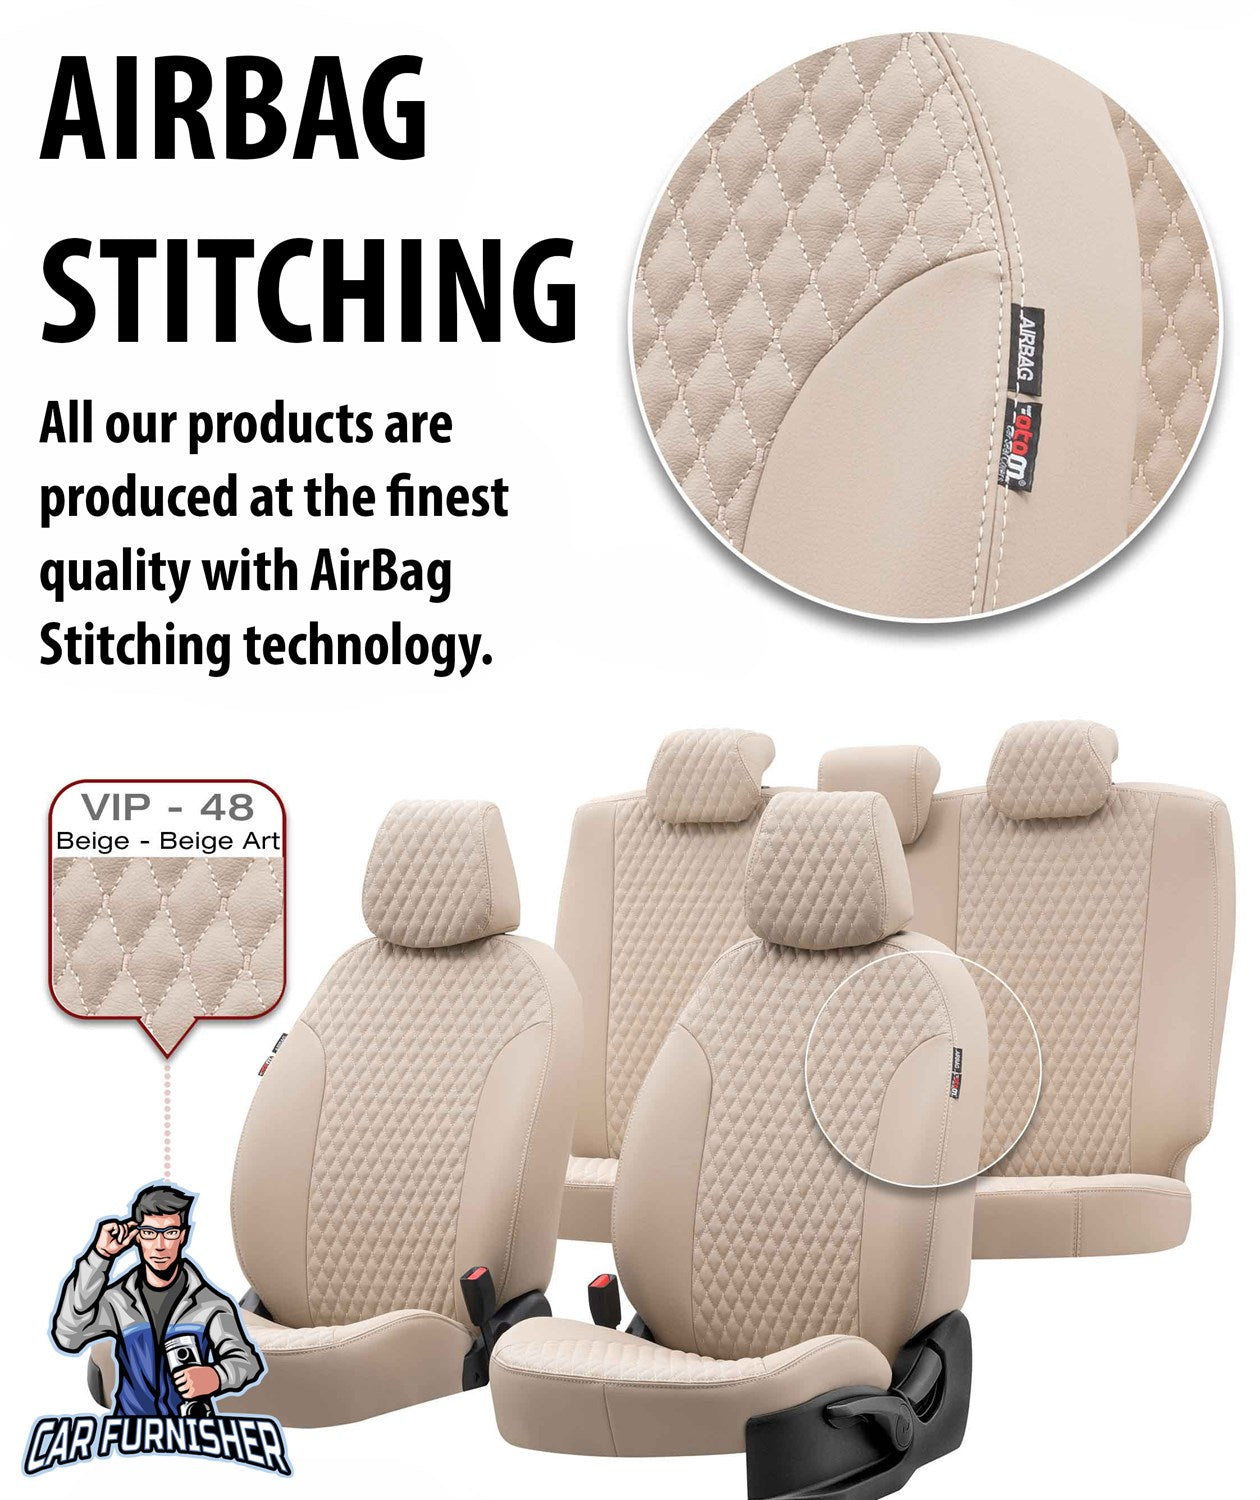 Kia Ceed Seat Covers Amsterdam Leather Design Beige Leather